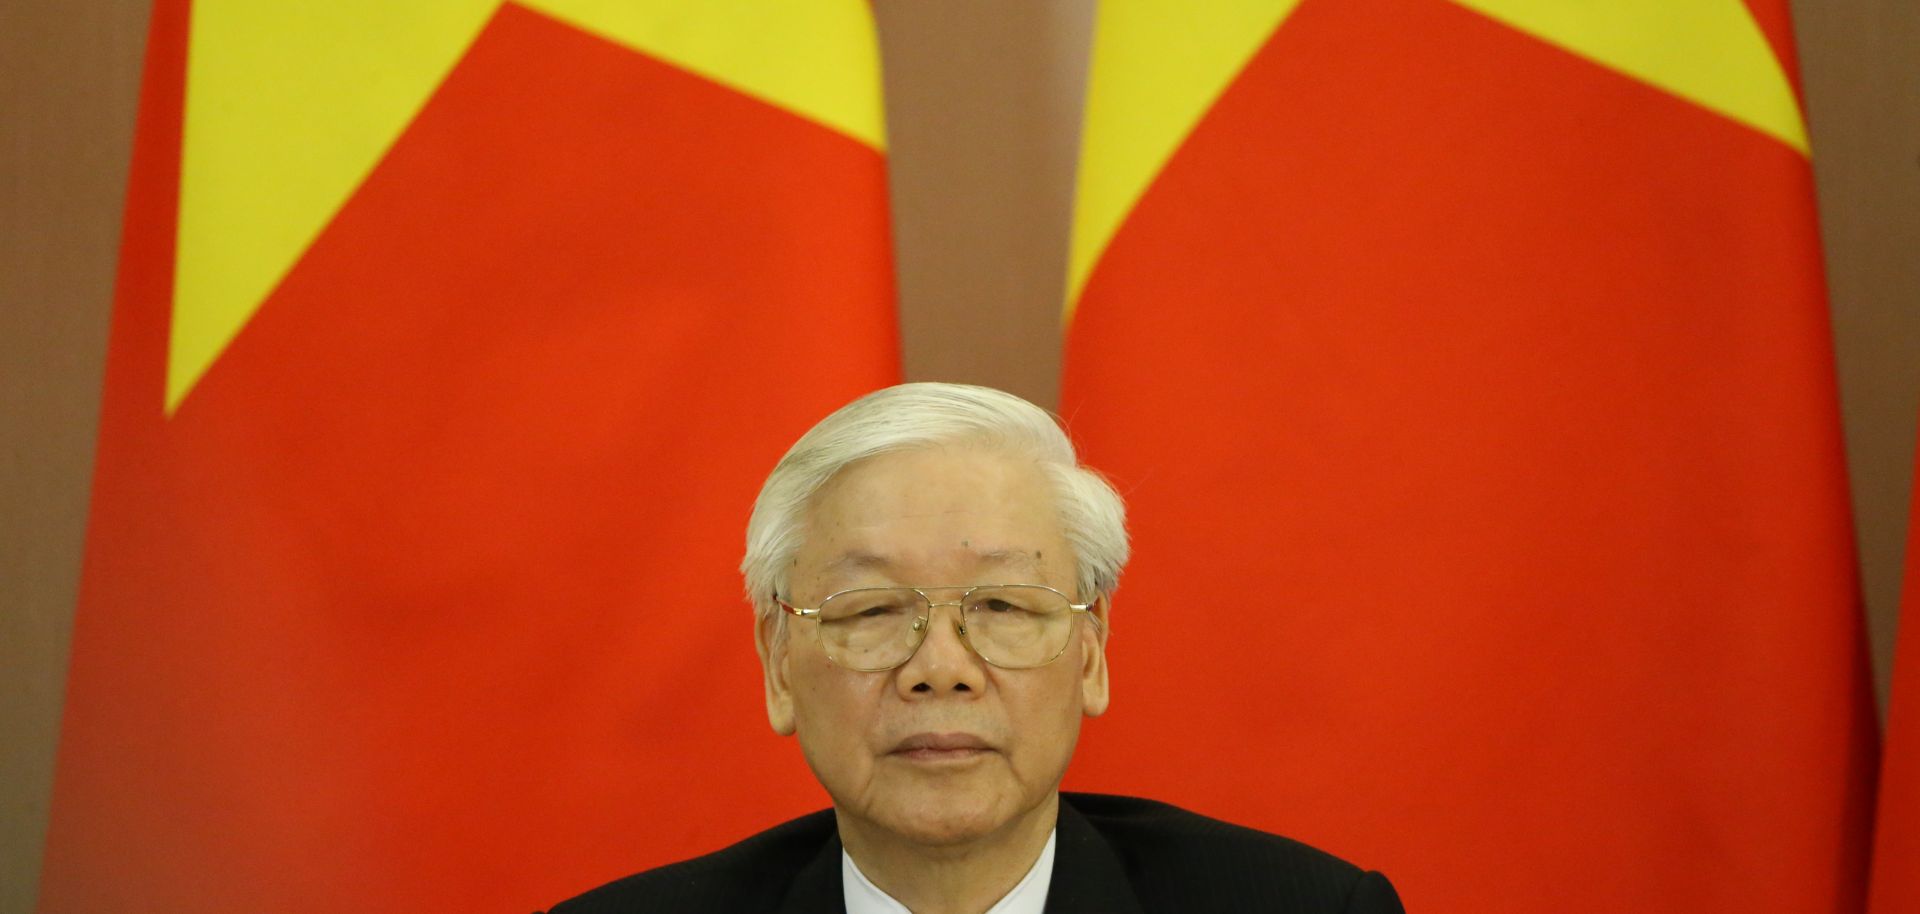 Nguyen Phu Trong, Vietnam’s president and chief of the ruling Communist Party, attends a meeting in Sochi, Russia, on Sept. 6, 2018.